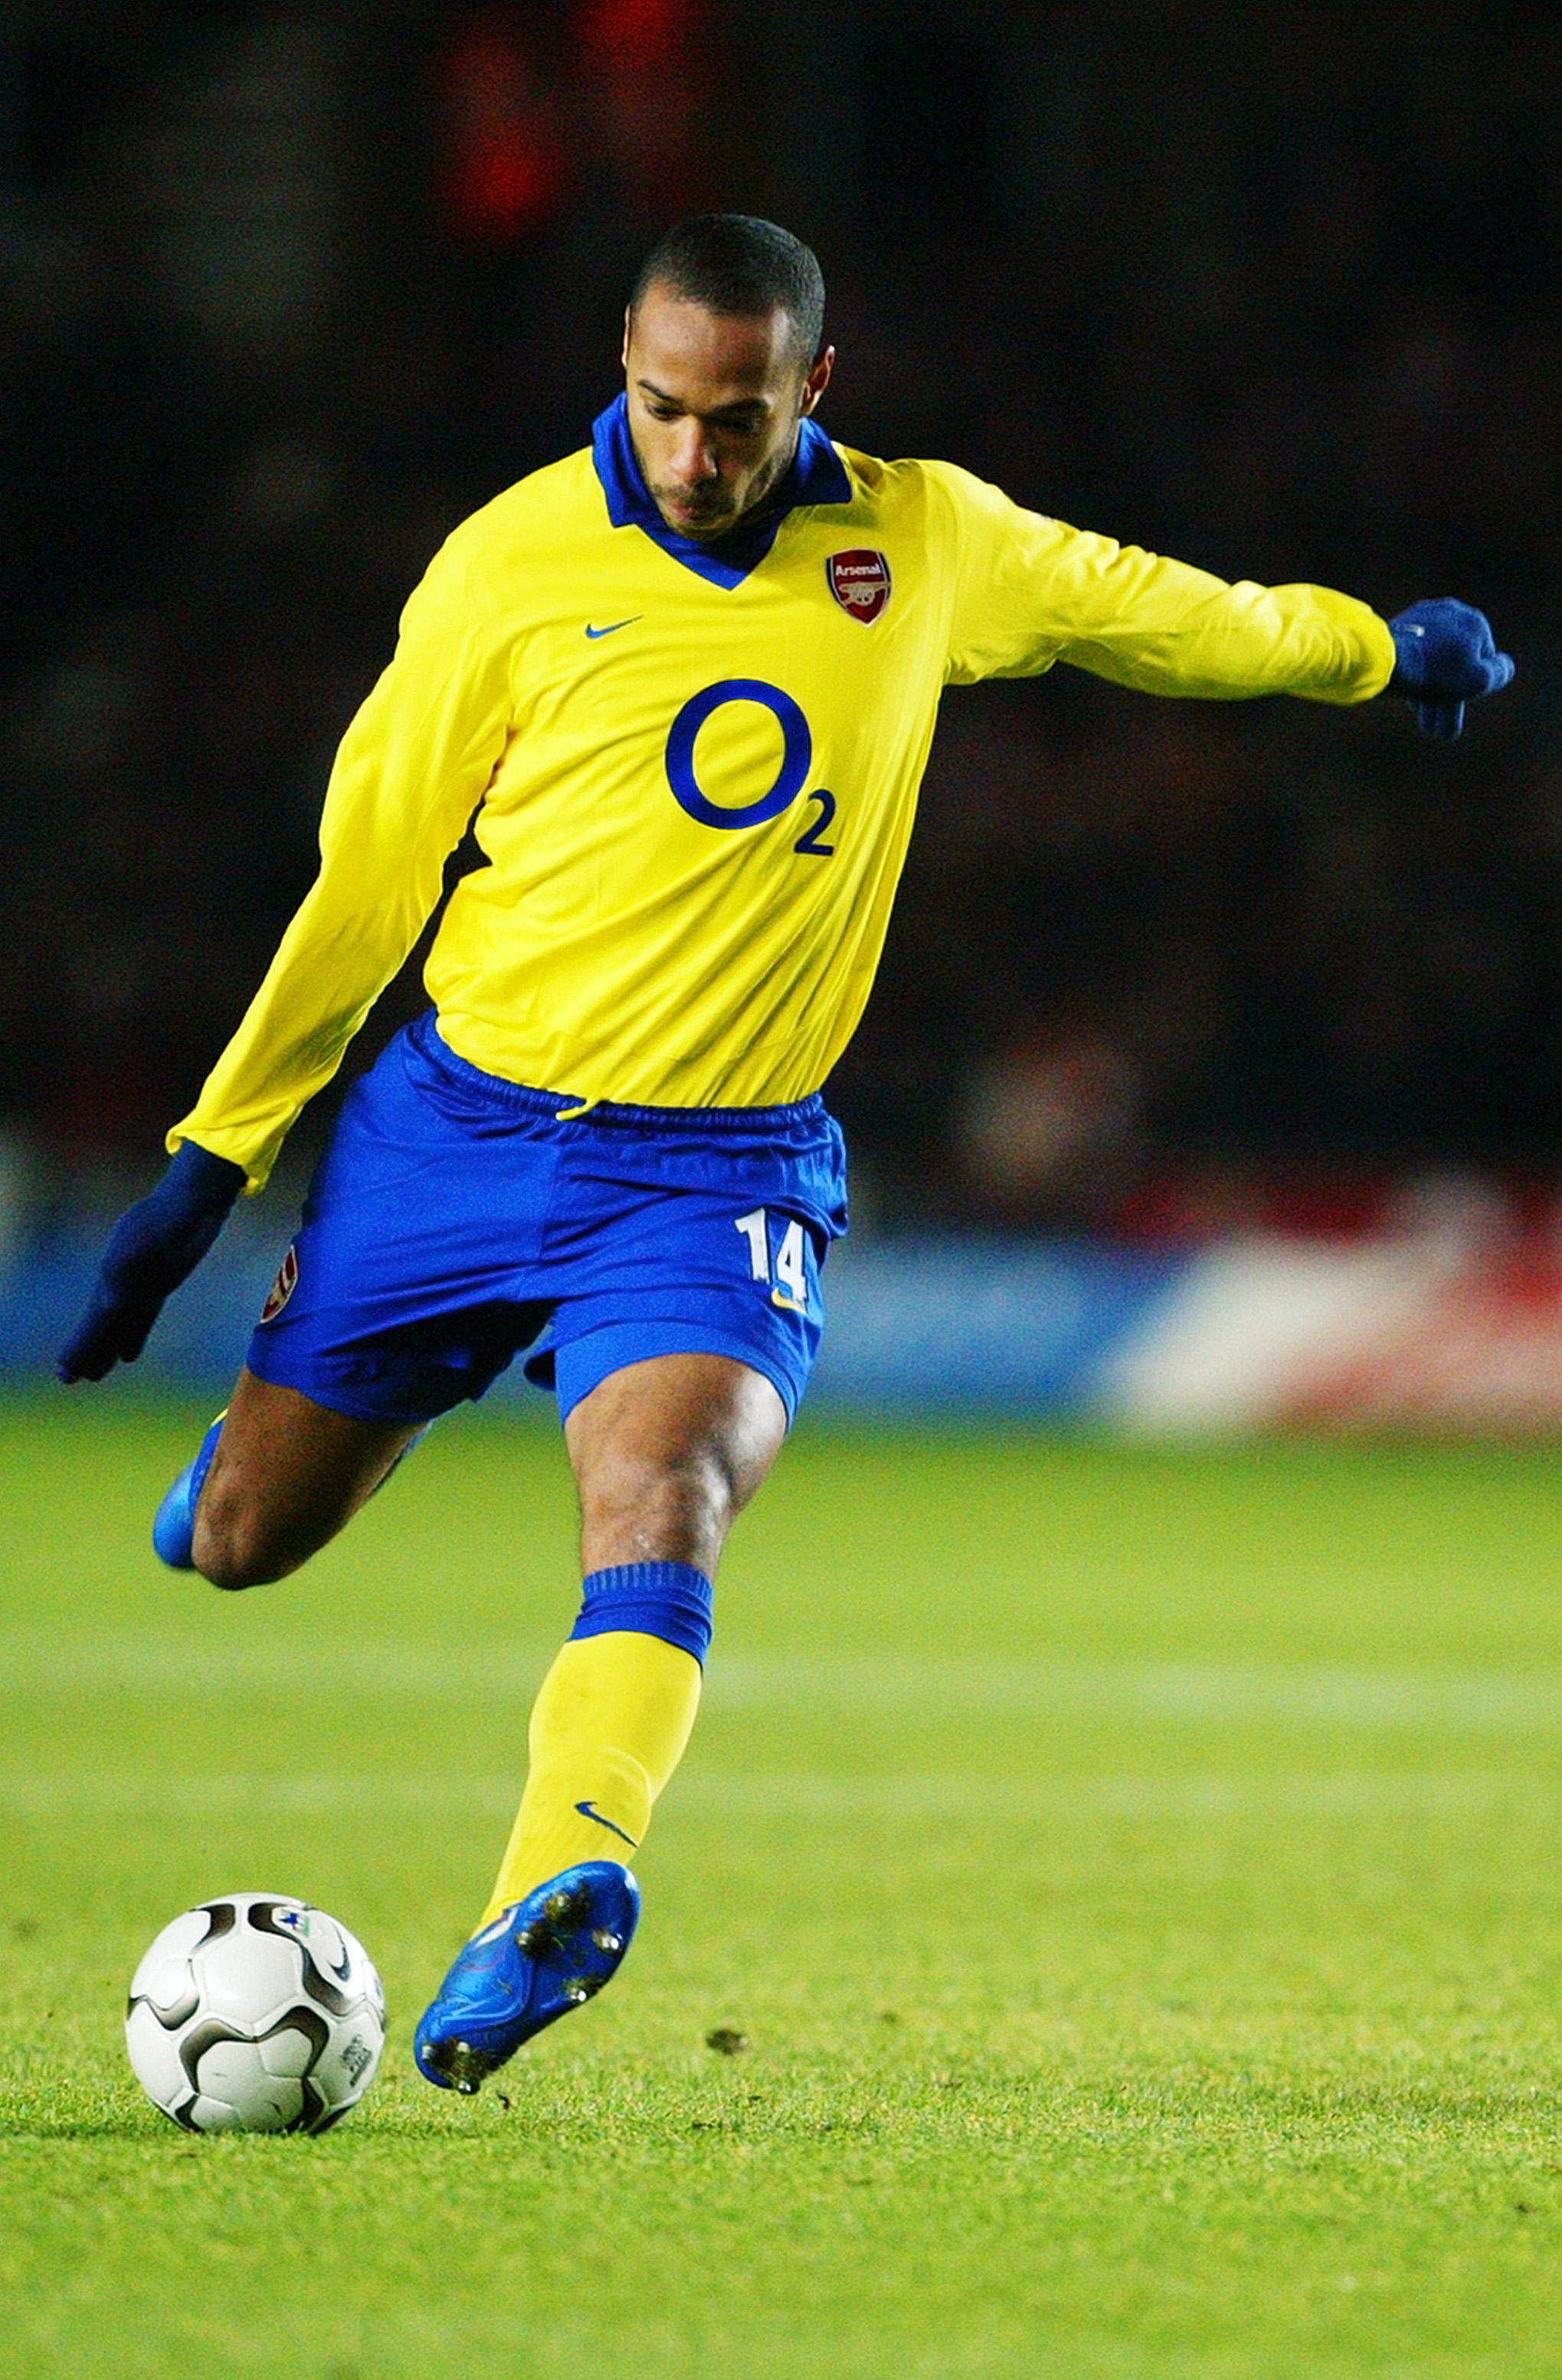 SOUTHAMPTON - DECEMBER 29:  Thierry Henry of Arsenal strikes the ball during the FA Barclaycard Premiership match between Southampton and Arsenal on December 29, 2003 at St Mary's Stadium in Southampton, England.  Arsenal won the match 1-0.  (Photo by Mik